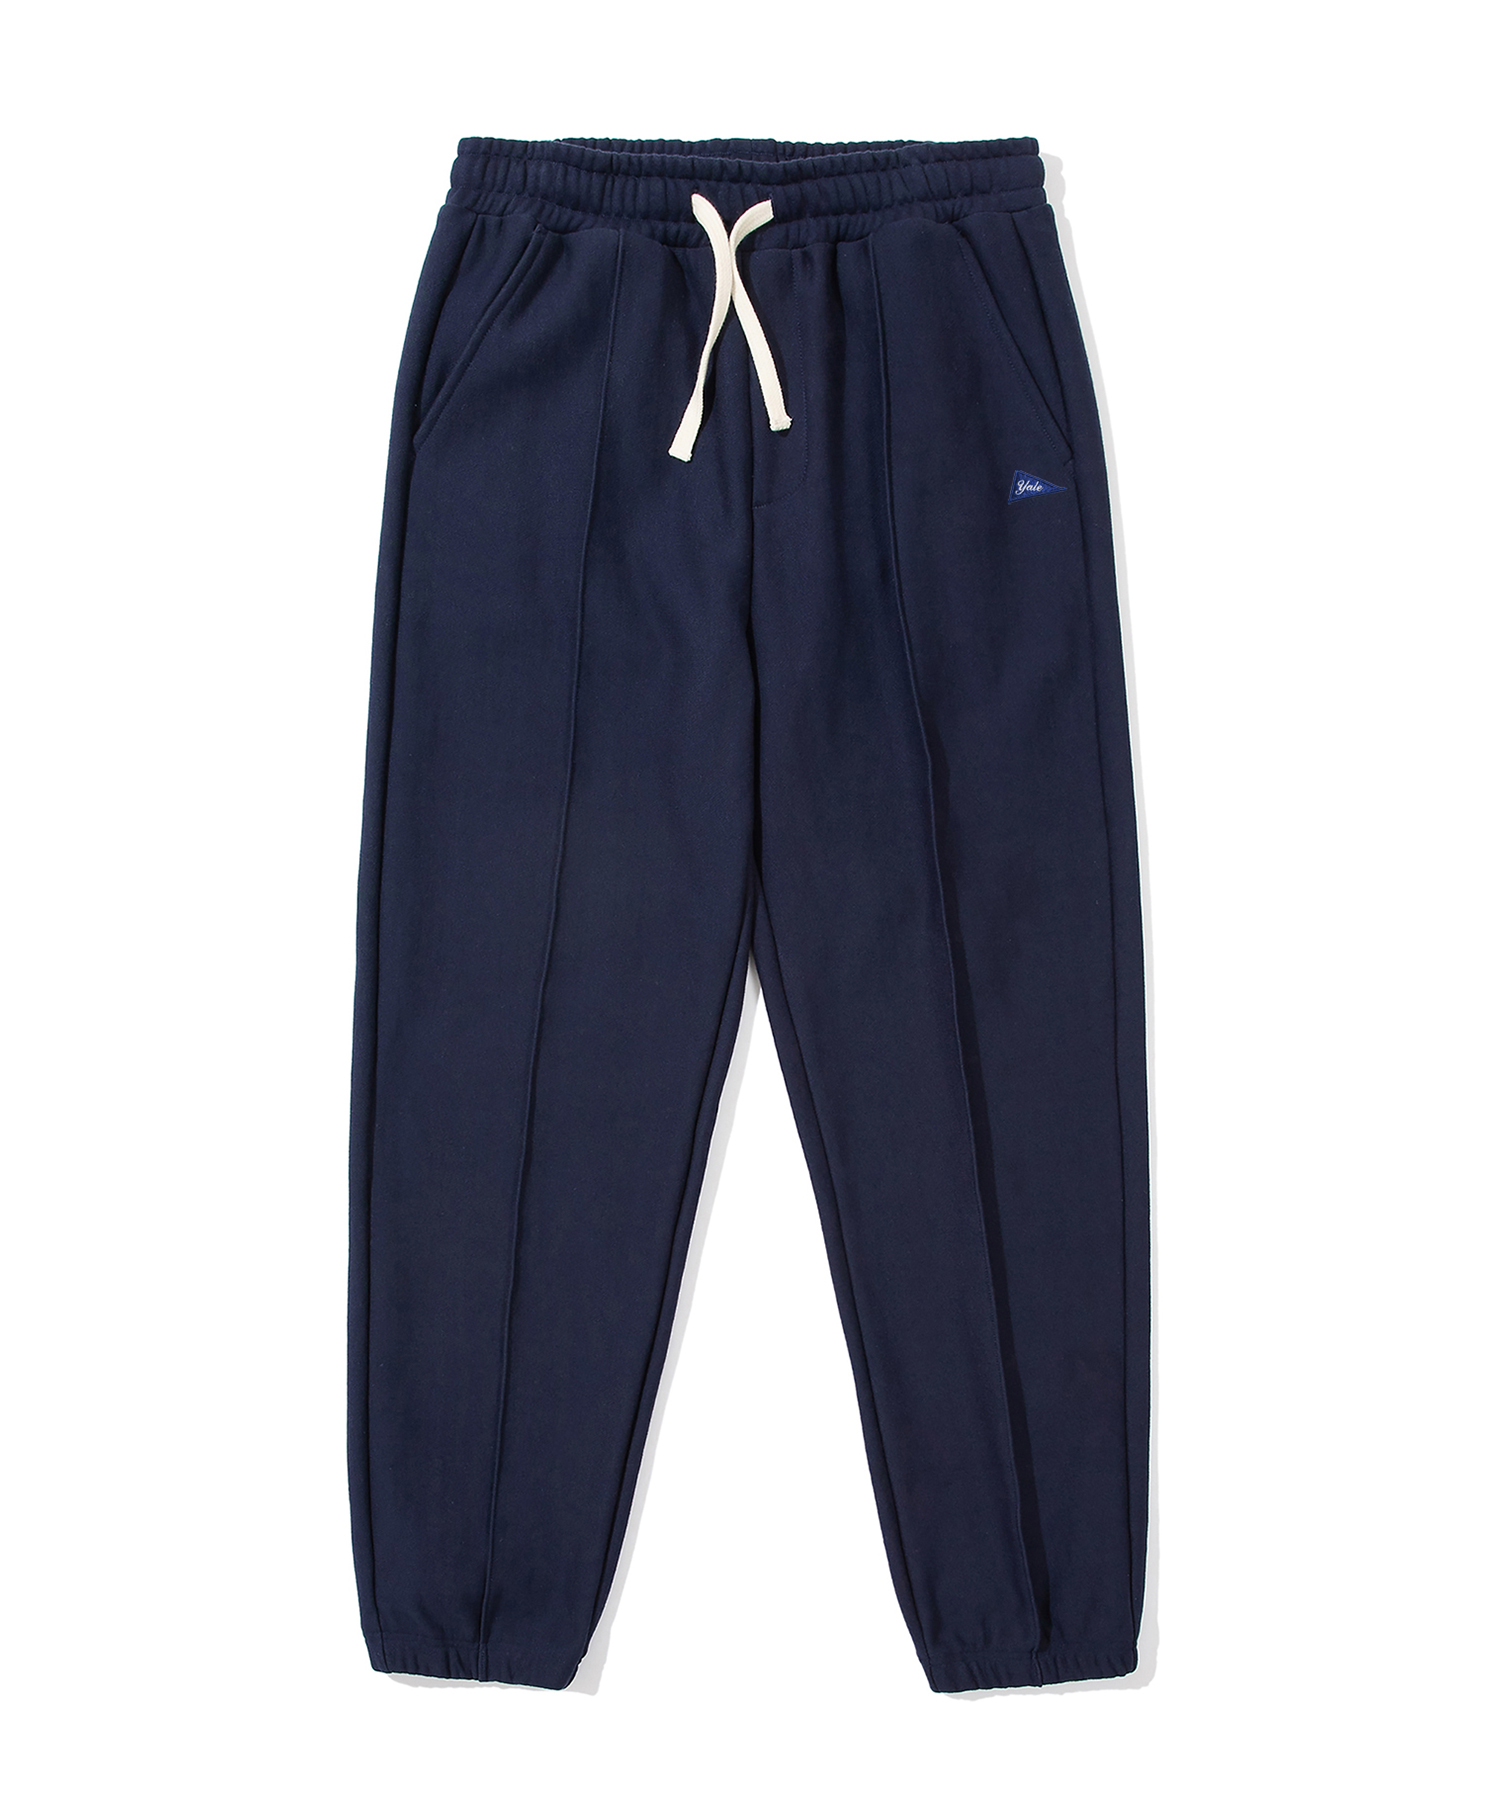 REVERSE WEAVE PIPING PANTS NAVY